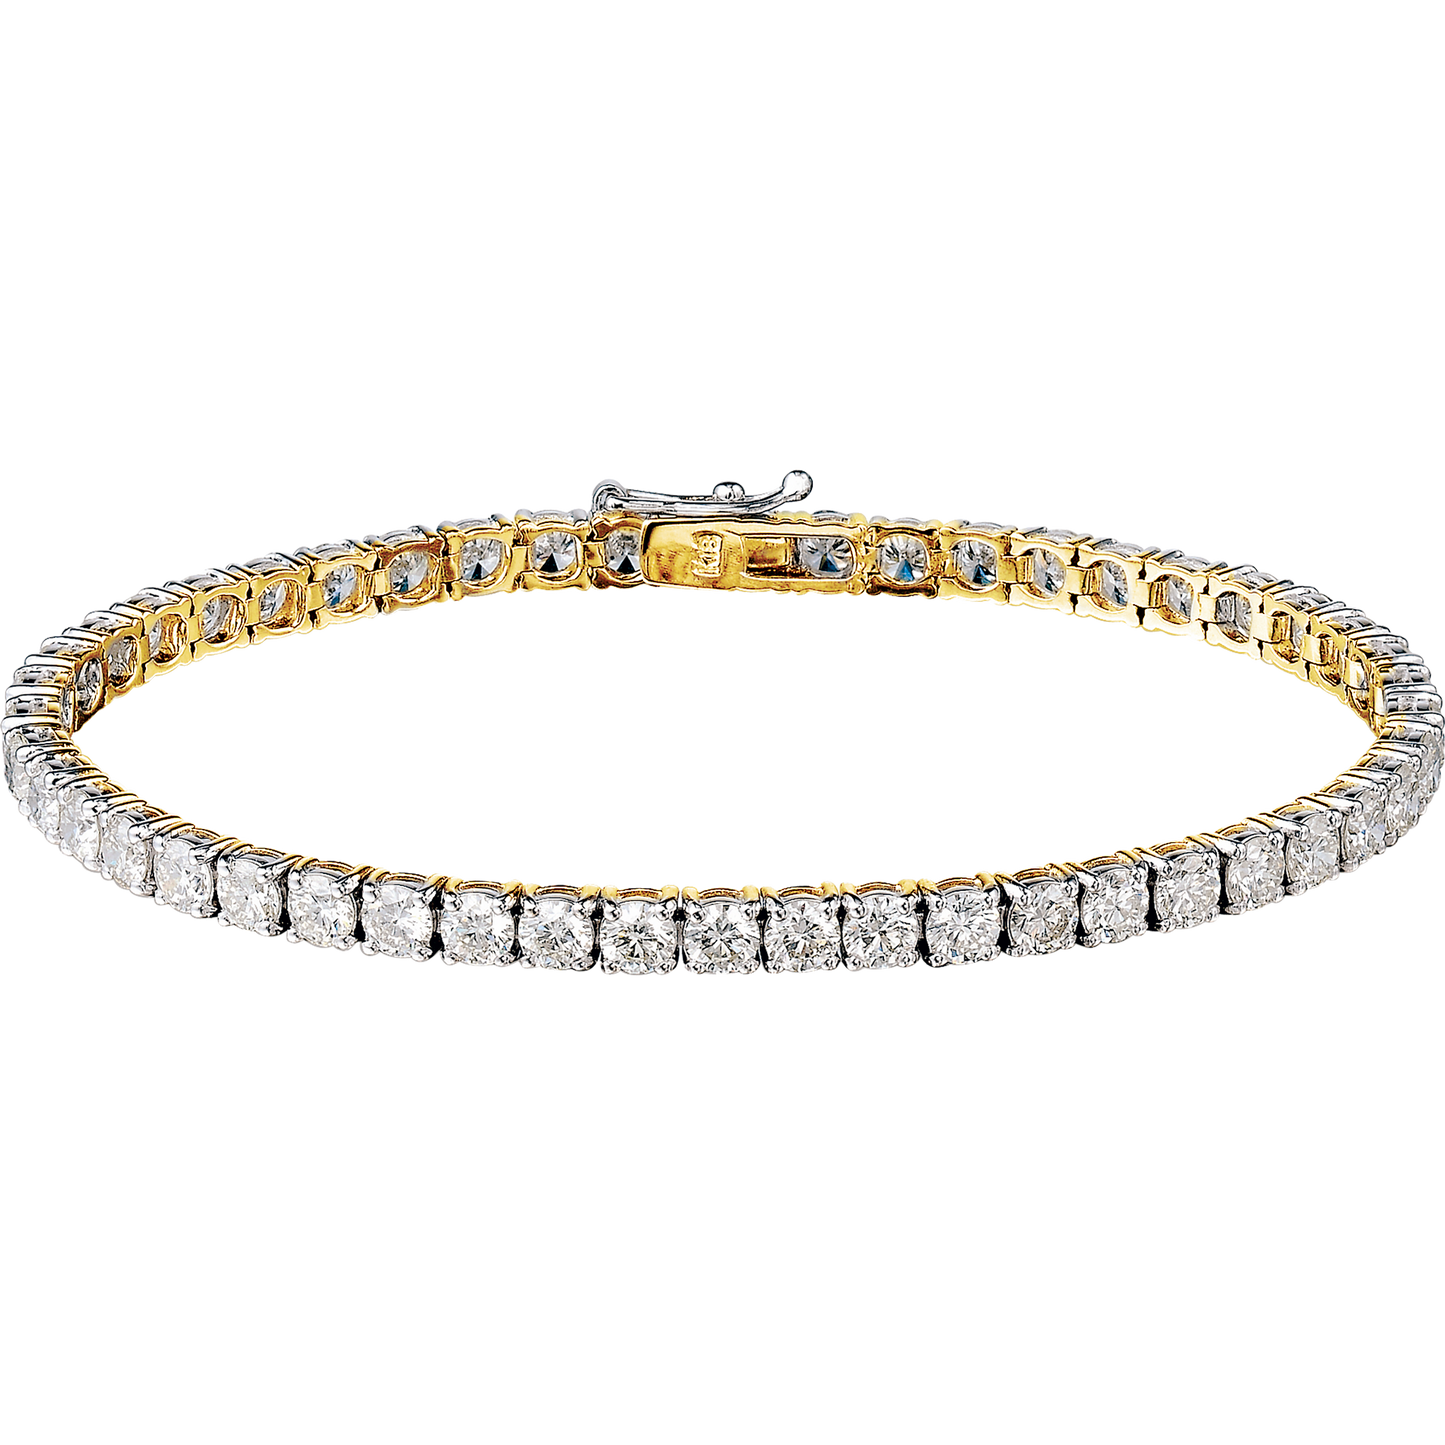 1.00ct Diamond Bracelet with 9ct Yellow and White Gold